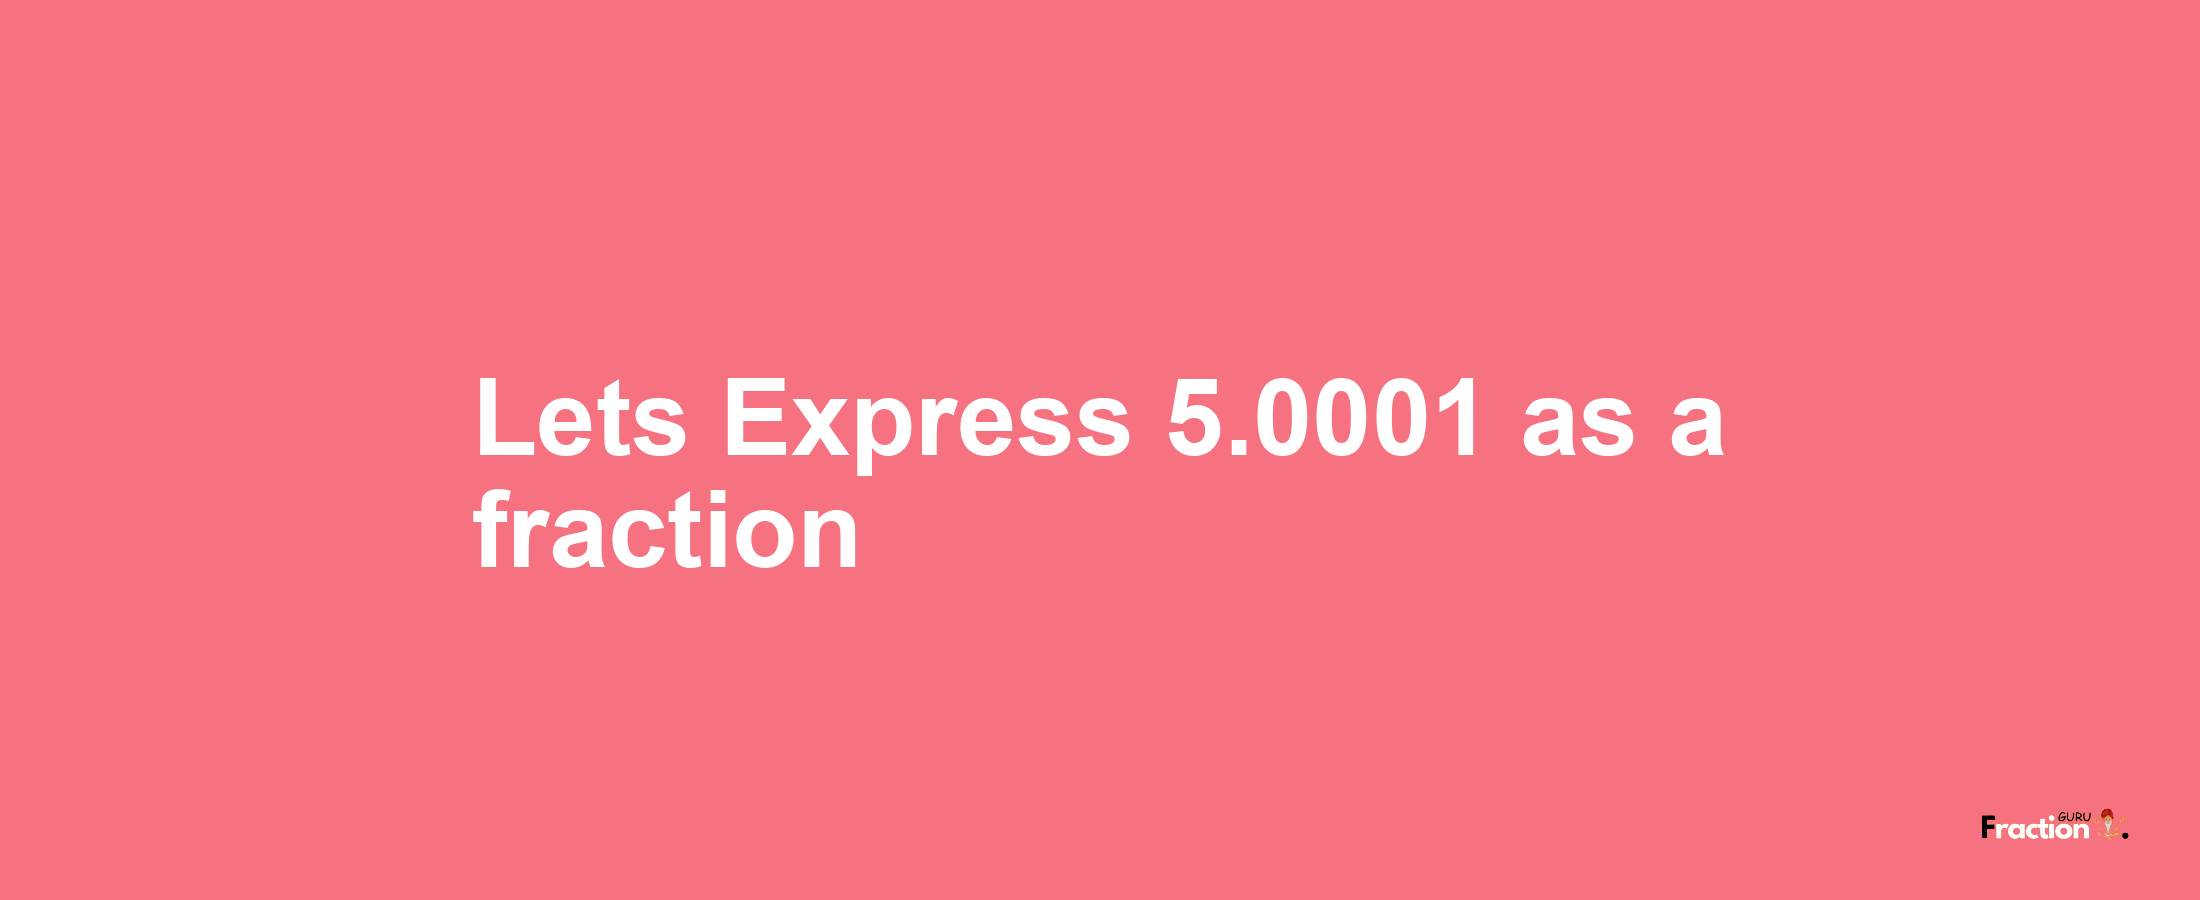 Lets Express 5.0001 as afraction